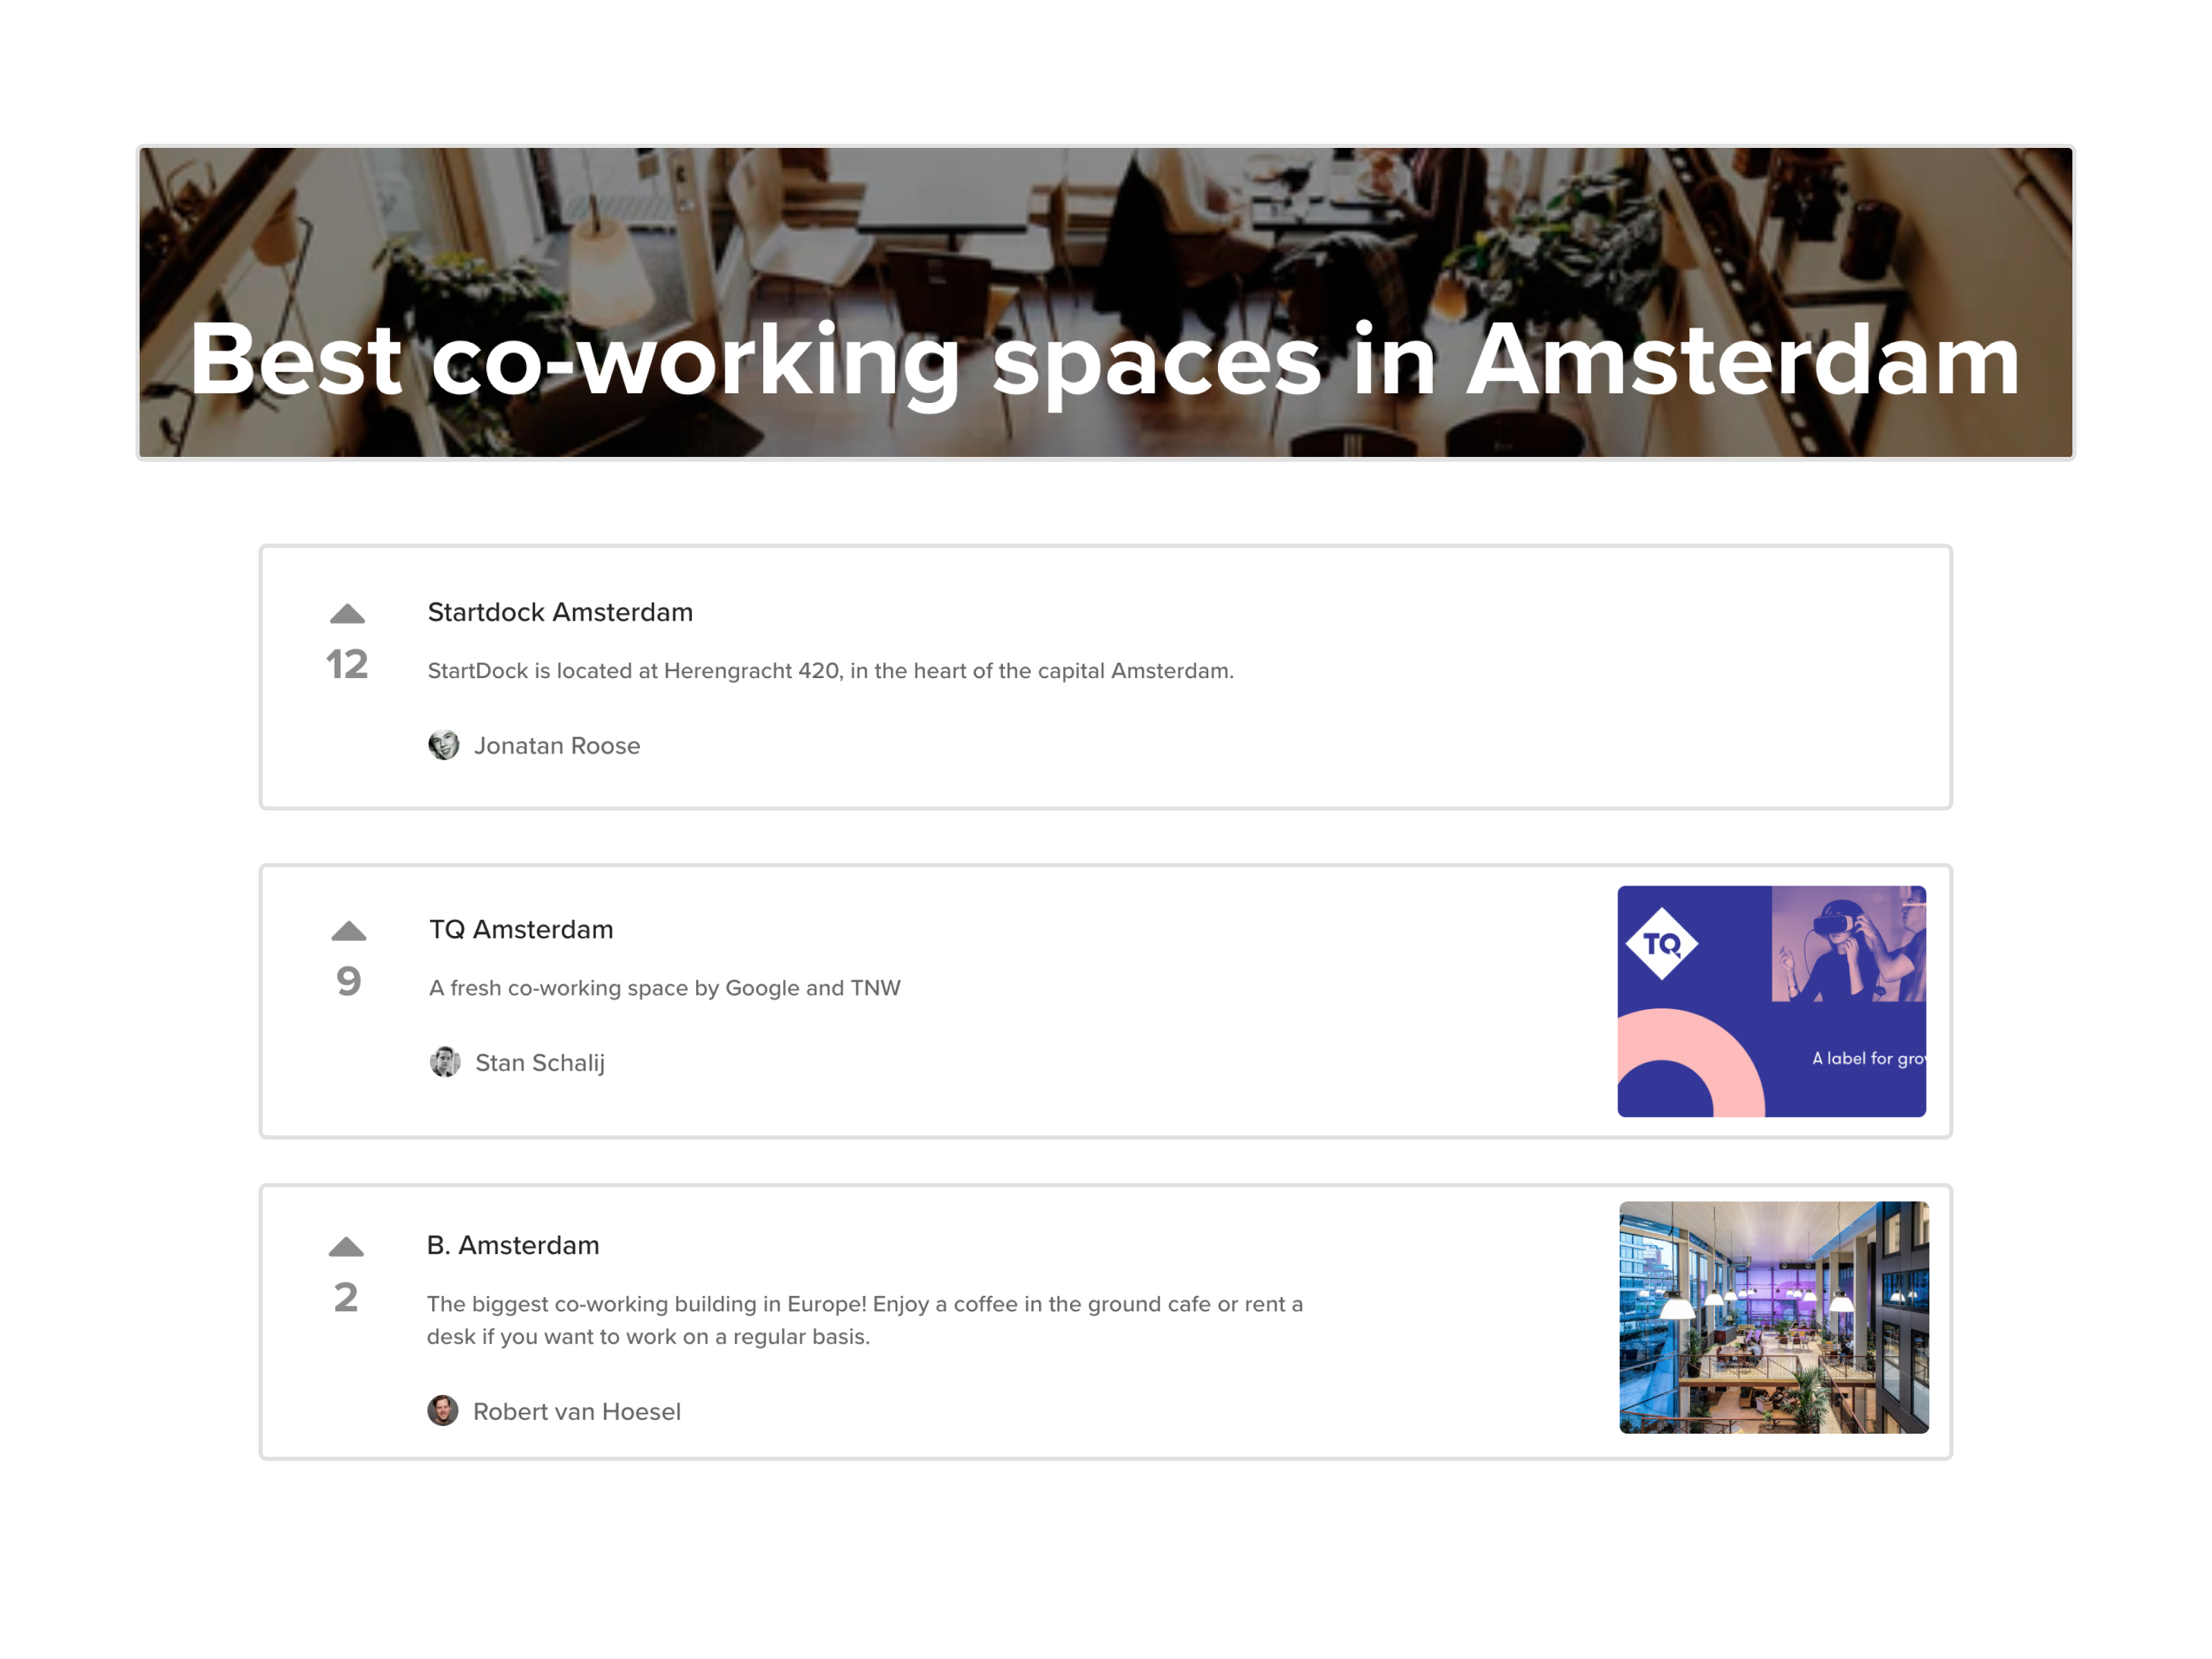 List of the best co-working spaces in Amsterdam